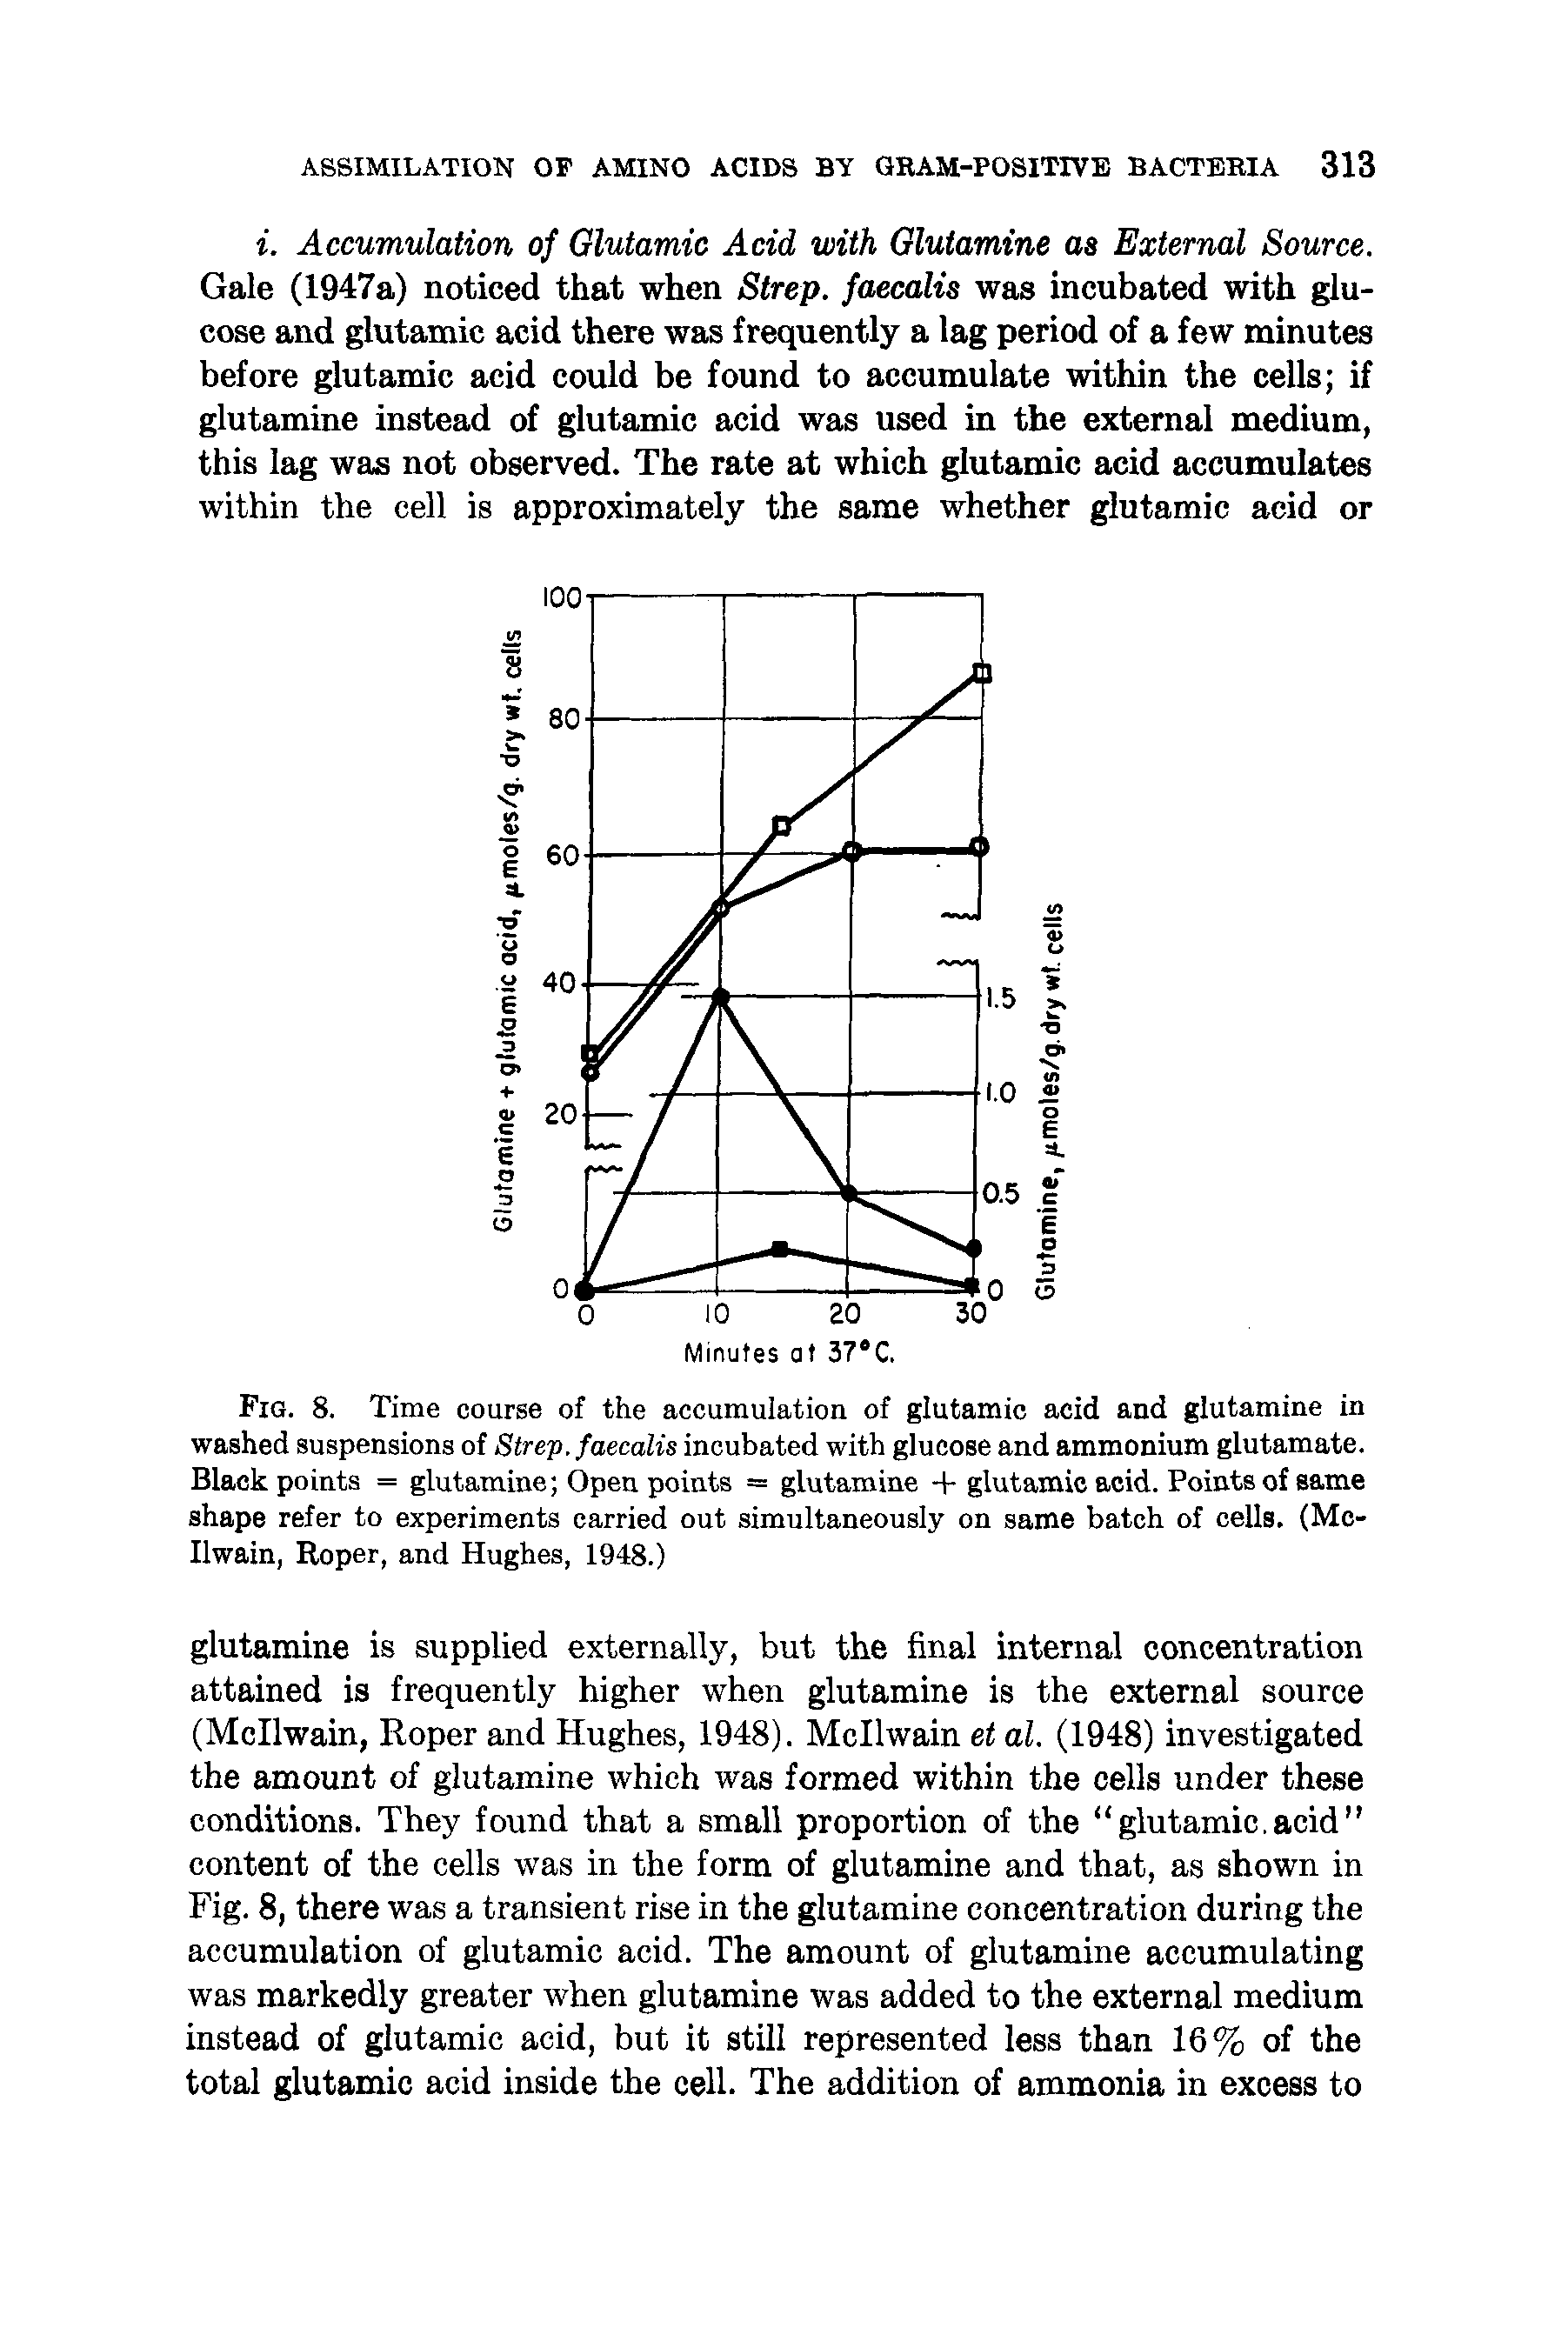 Fig. 8. Time course of the accumulation of glutamic acid and glutamine in washed suspensions of Strep, faecalis incubated with glucose and ammonium glutamate. Black points = glutamine Open points = glutamine + glutamic acid. Points of same shape refer to experiments carried out simultaneously on same batch of cells. (Mc-Ilwain, Roper, and Hughes, 1948.)...